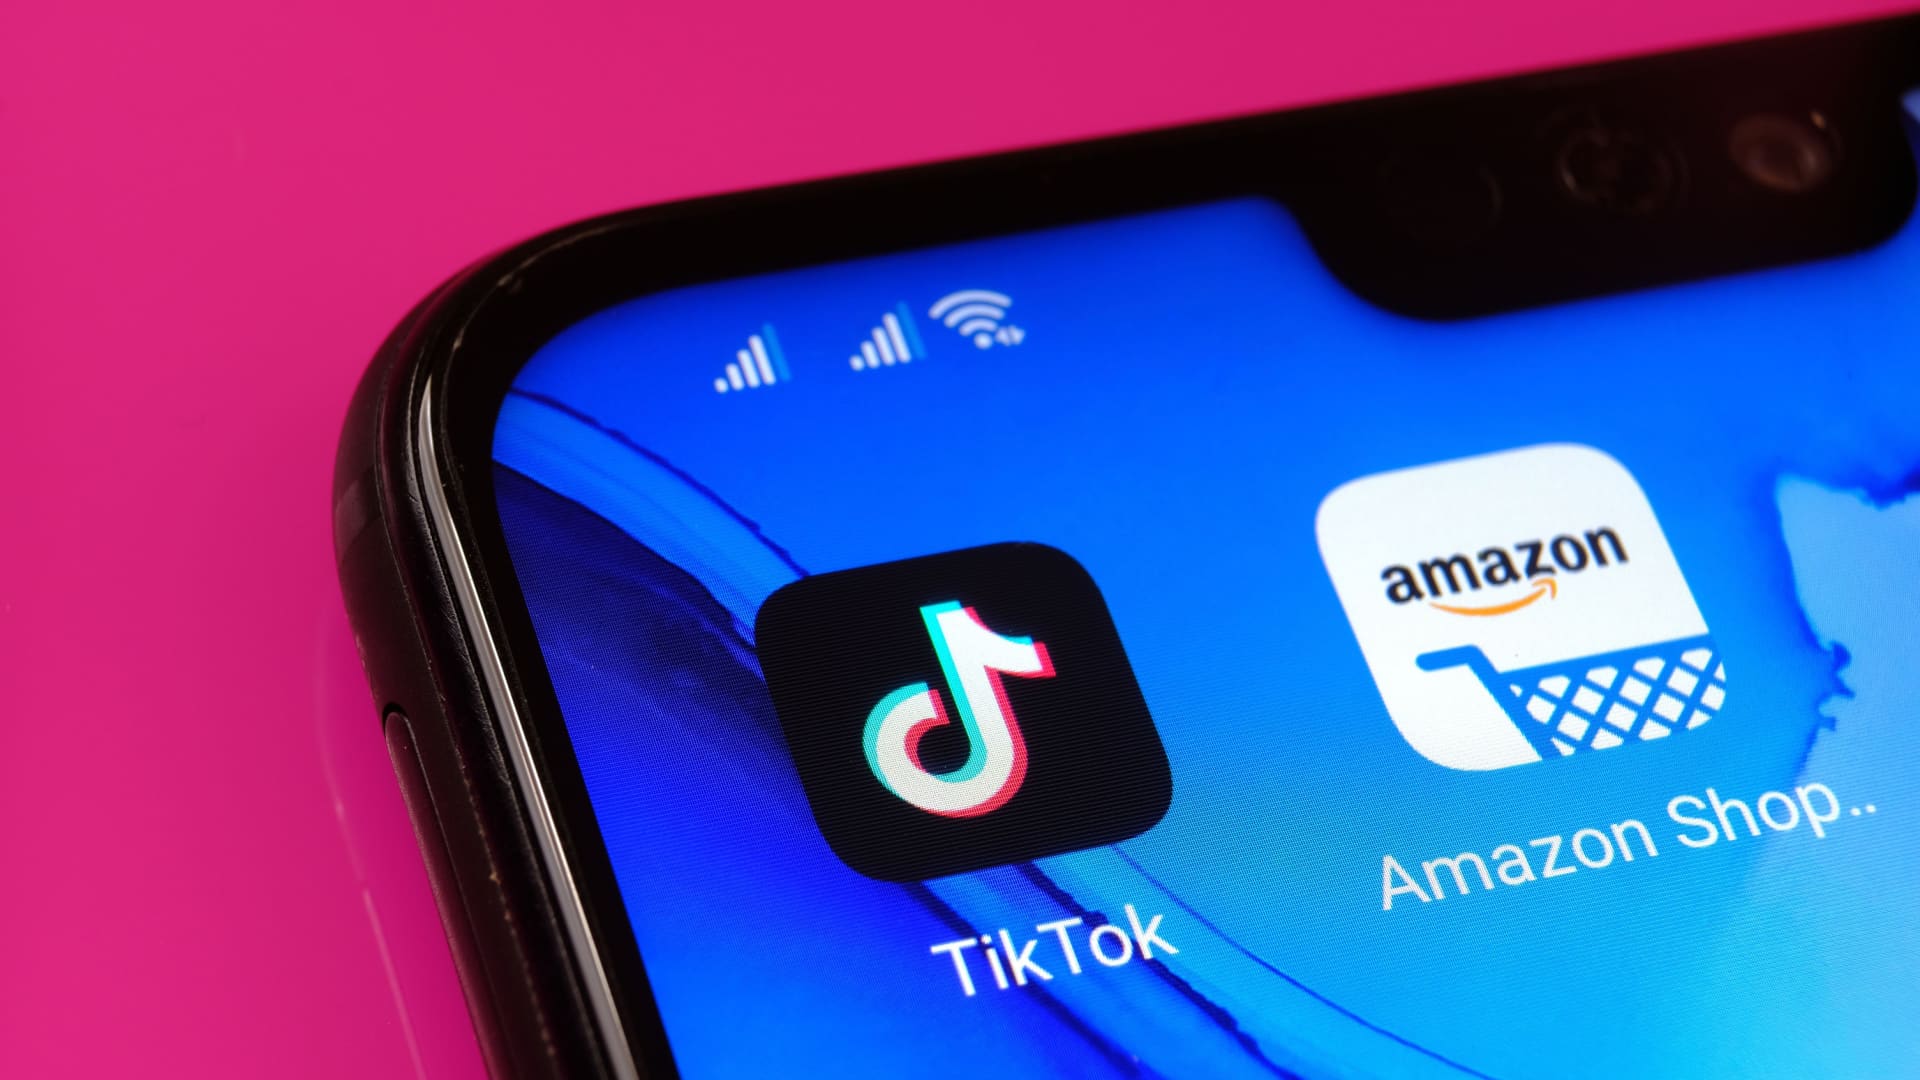 TikTok loses popularity as ecommerce search engine